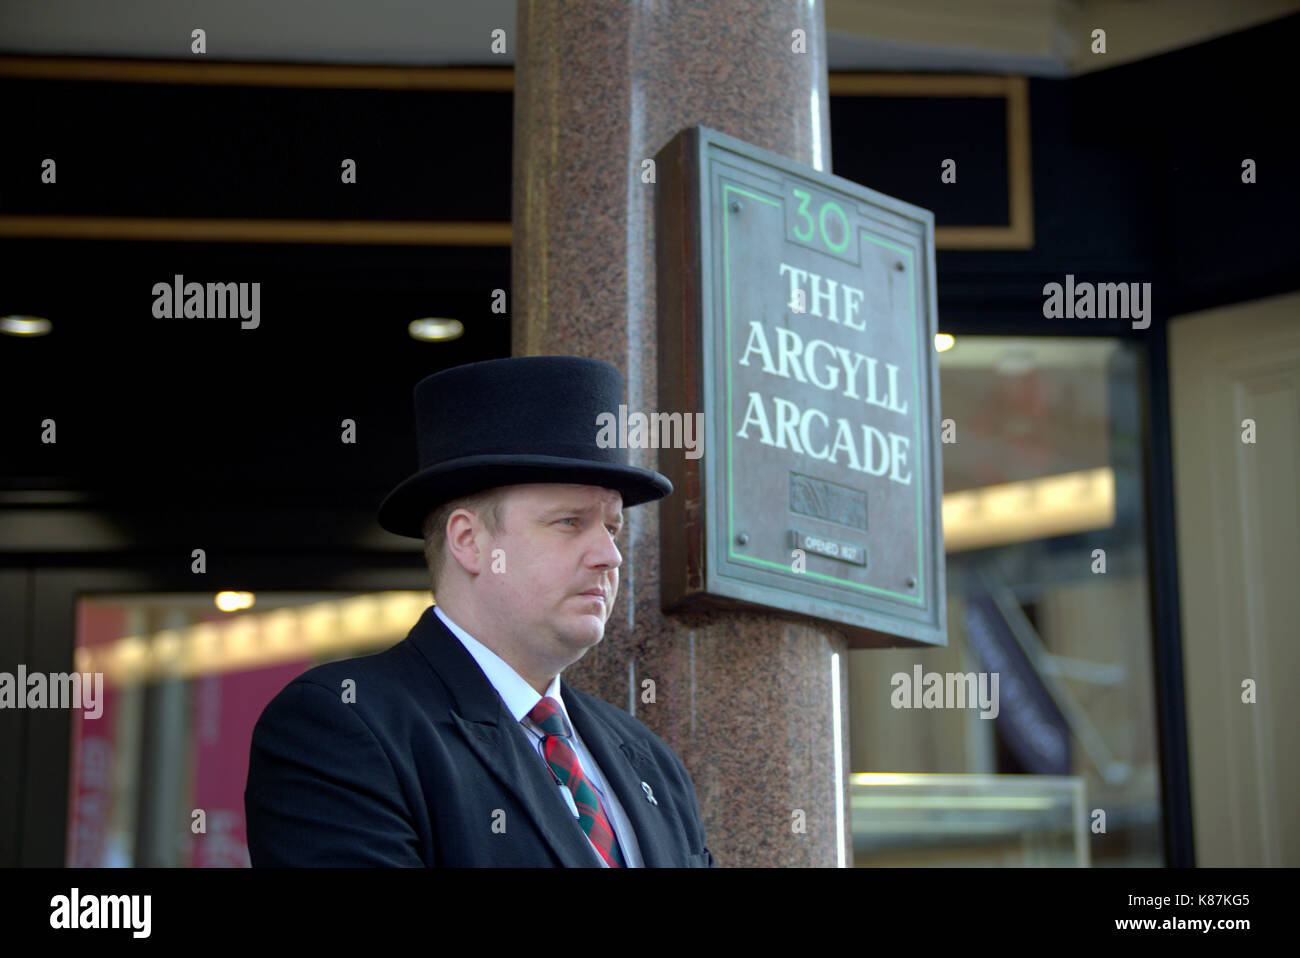 Argyle Arcade sign shopping centre the oldest mall in Glasgow entrance with uniformed doorman Stock Photo